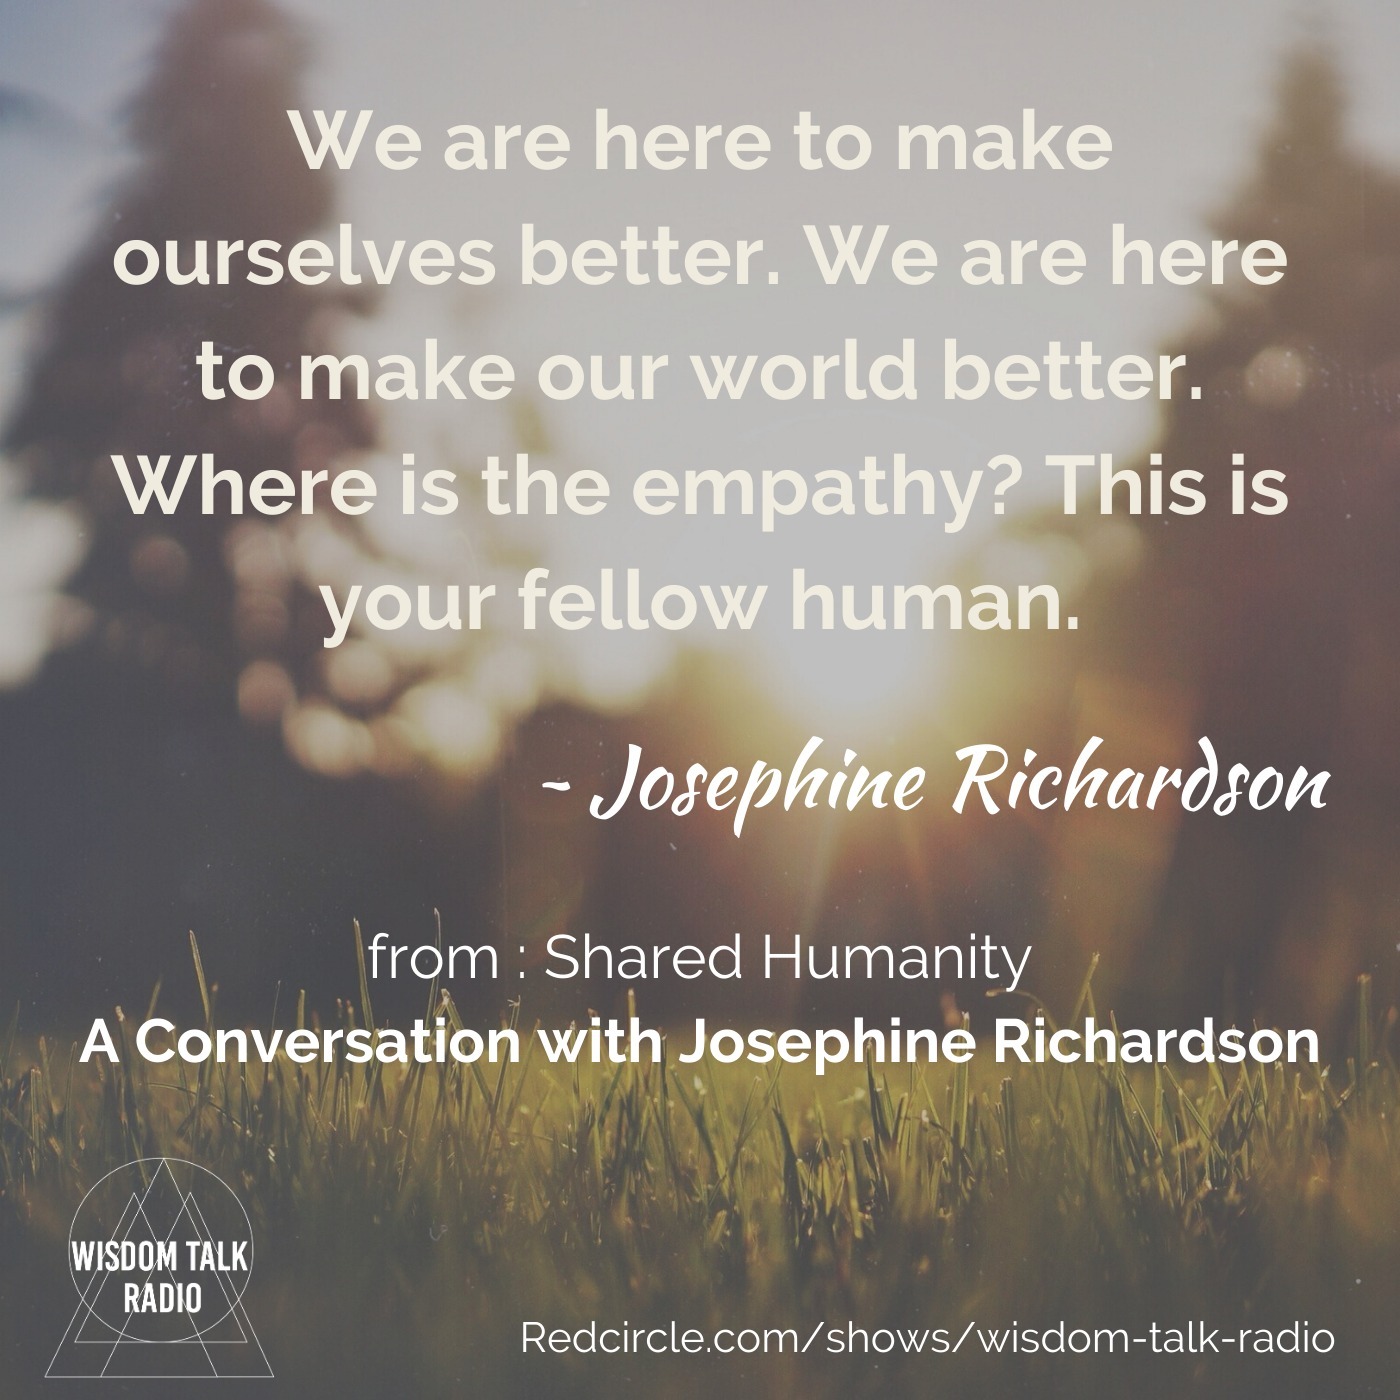 Shared Humanity: a Conversation with Josephine Richardson